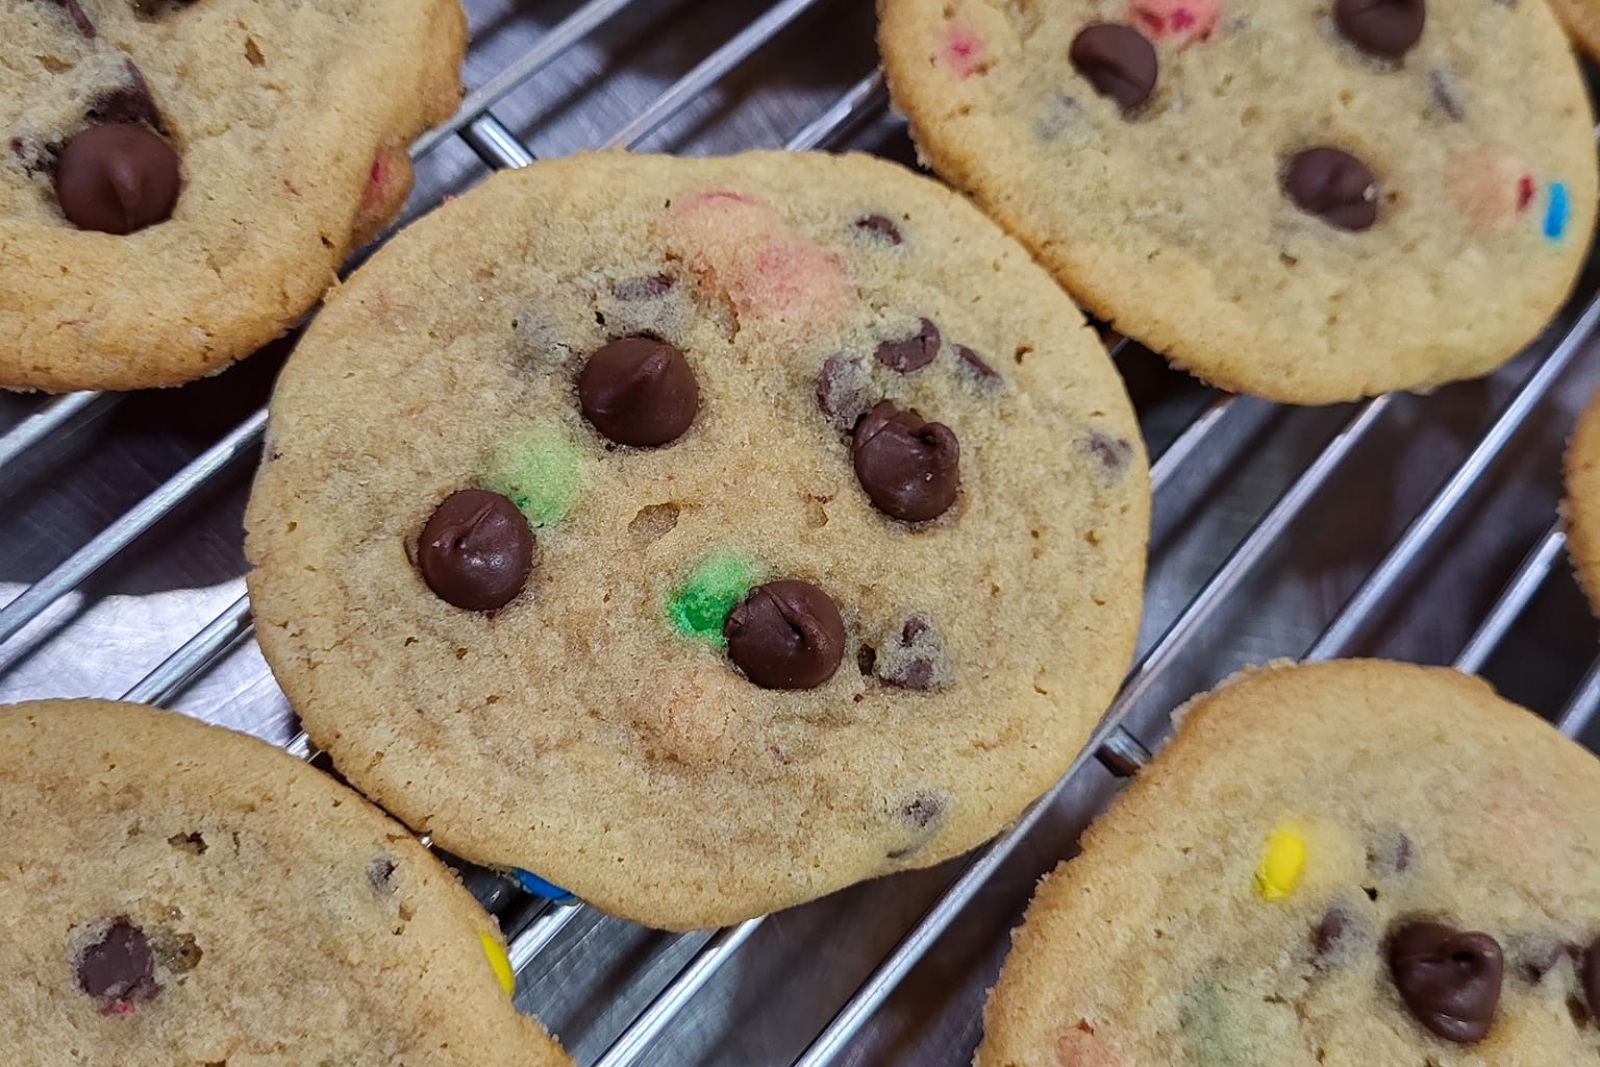 Chocolate chip and M&M cookies rest on a cooling rack